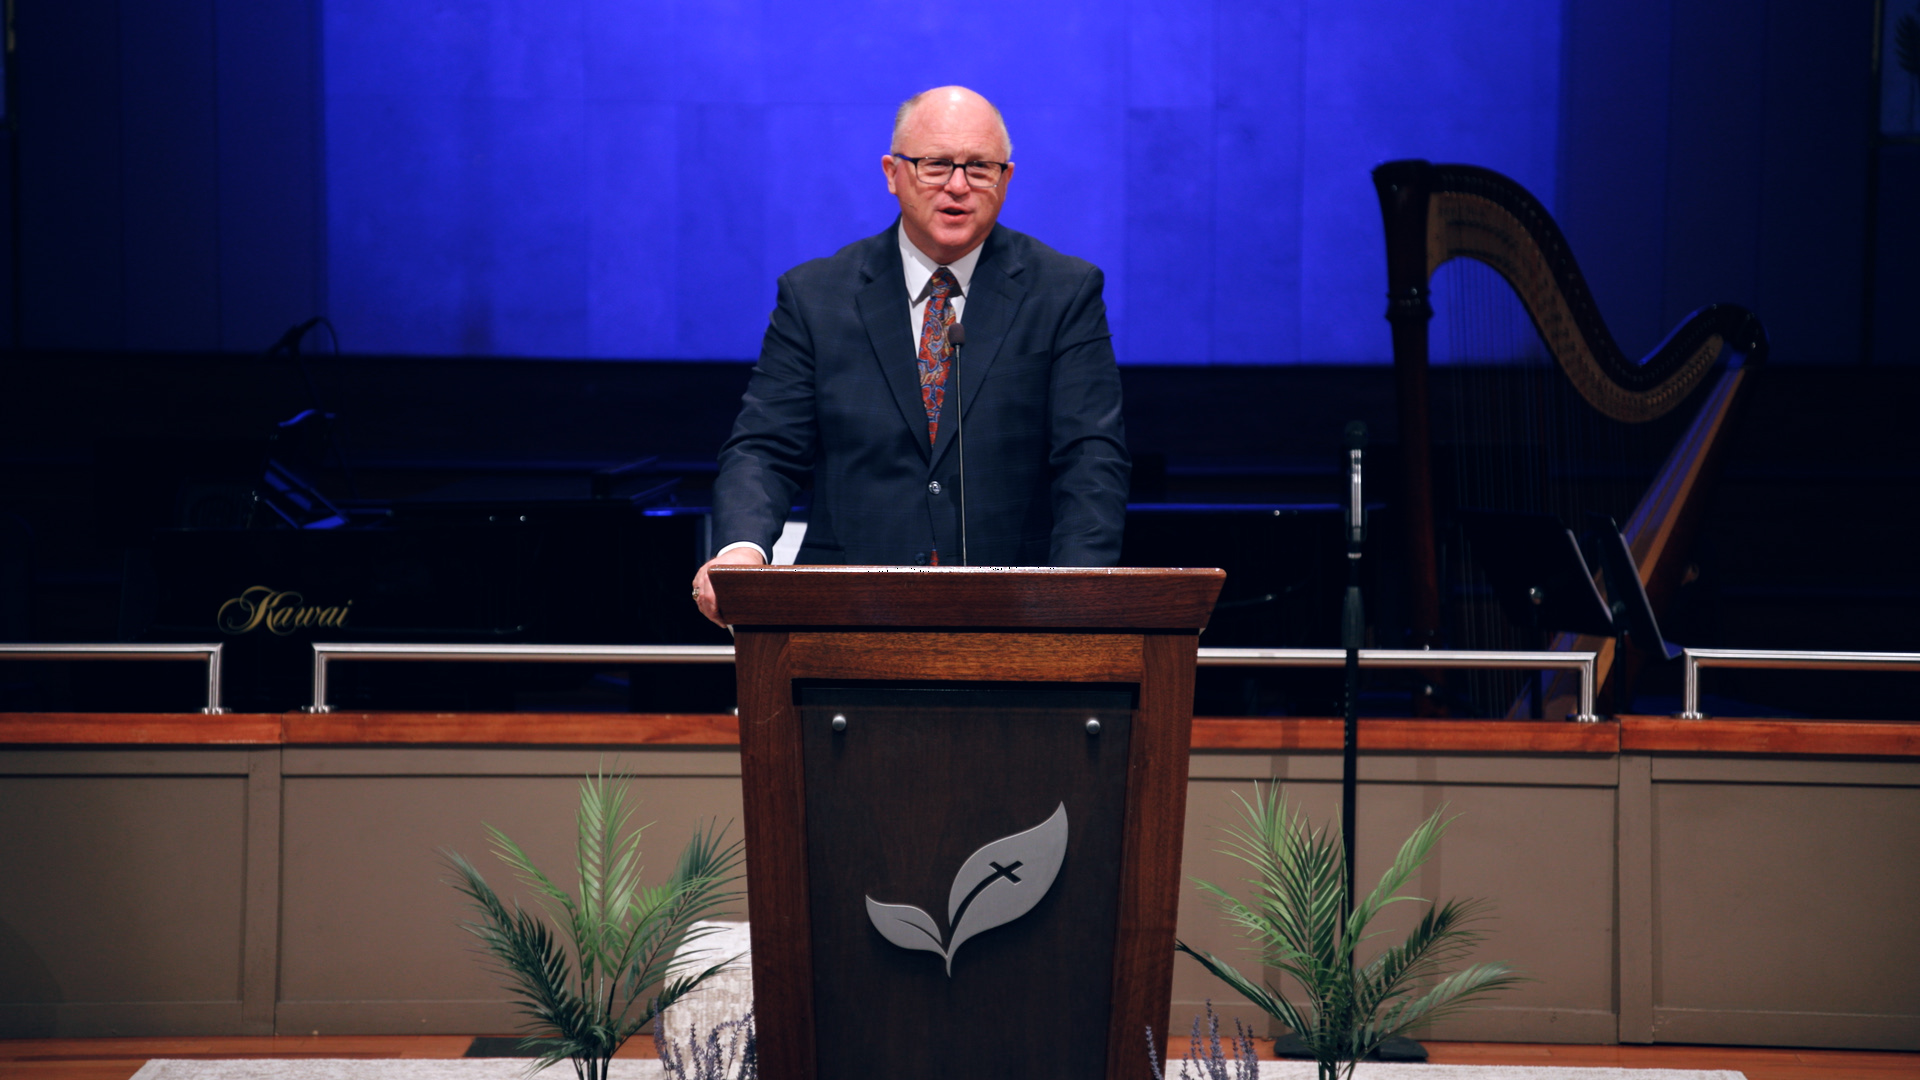 Pastor Paul Chappell: Justification By Faith